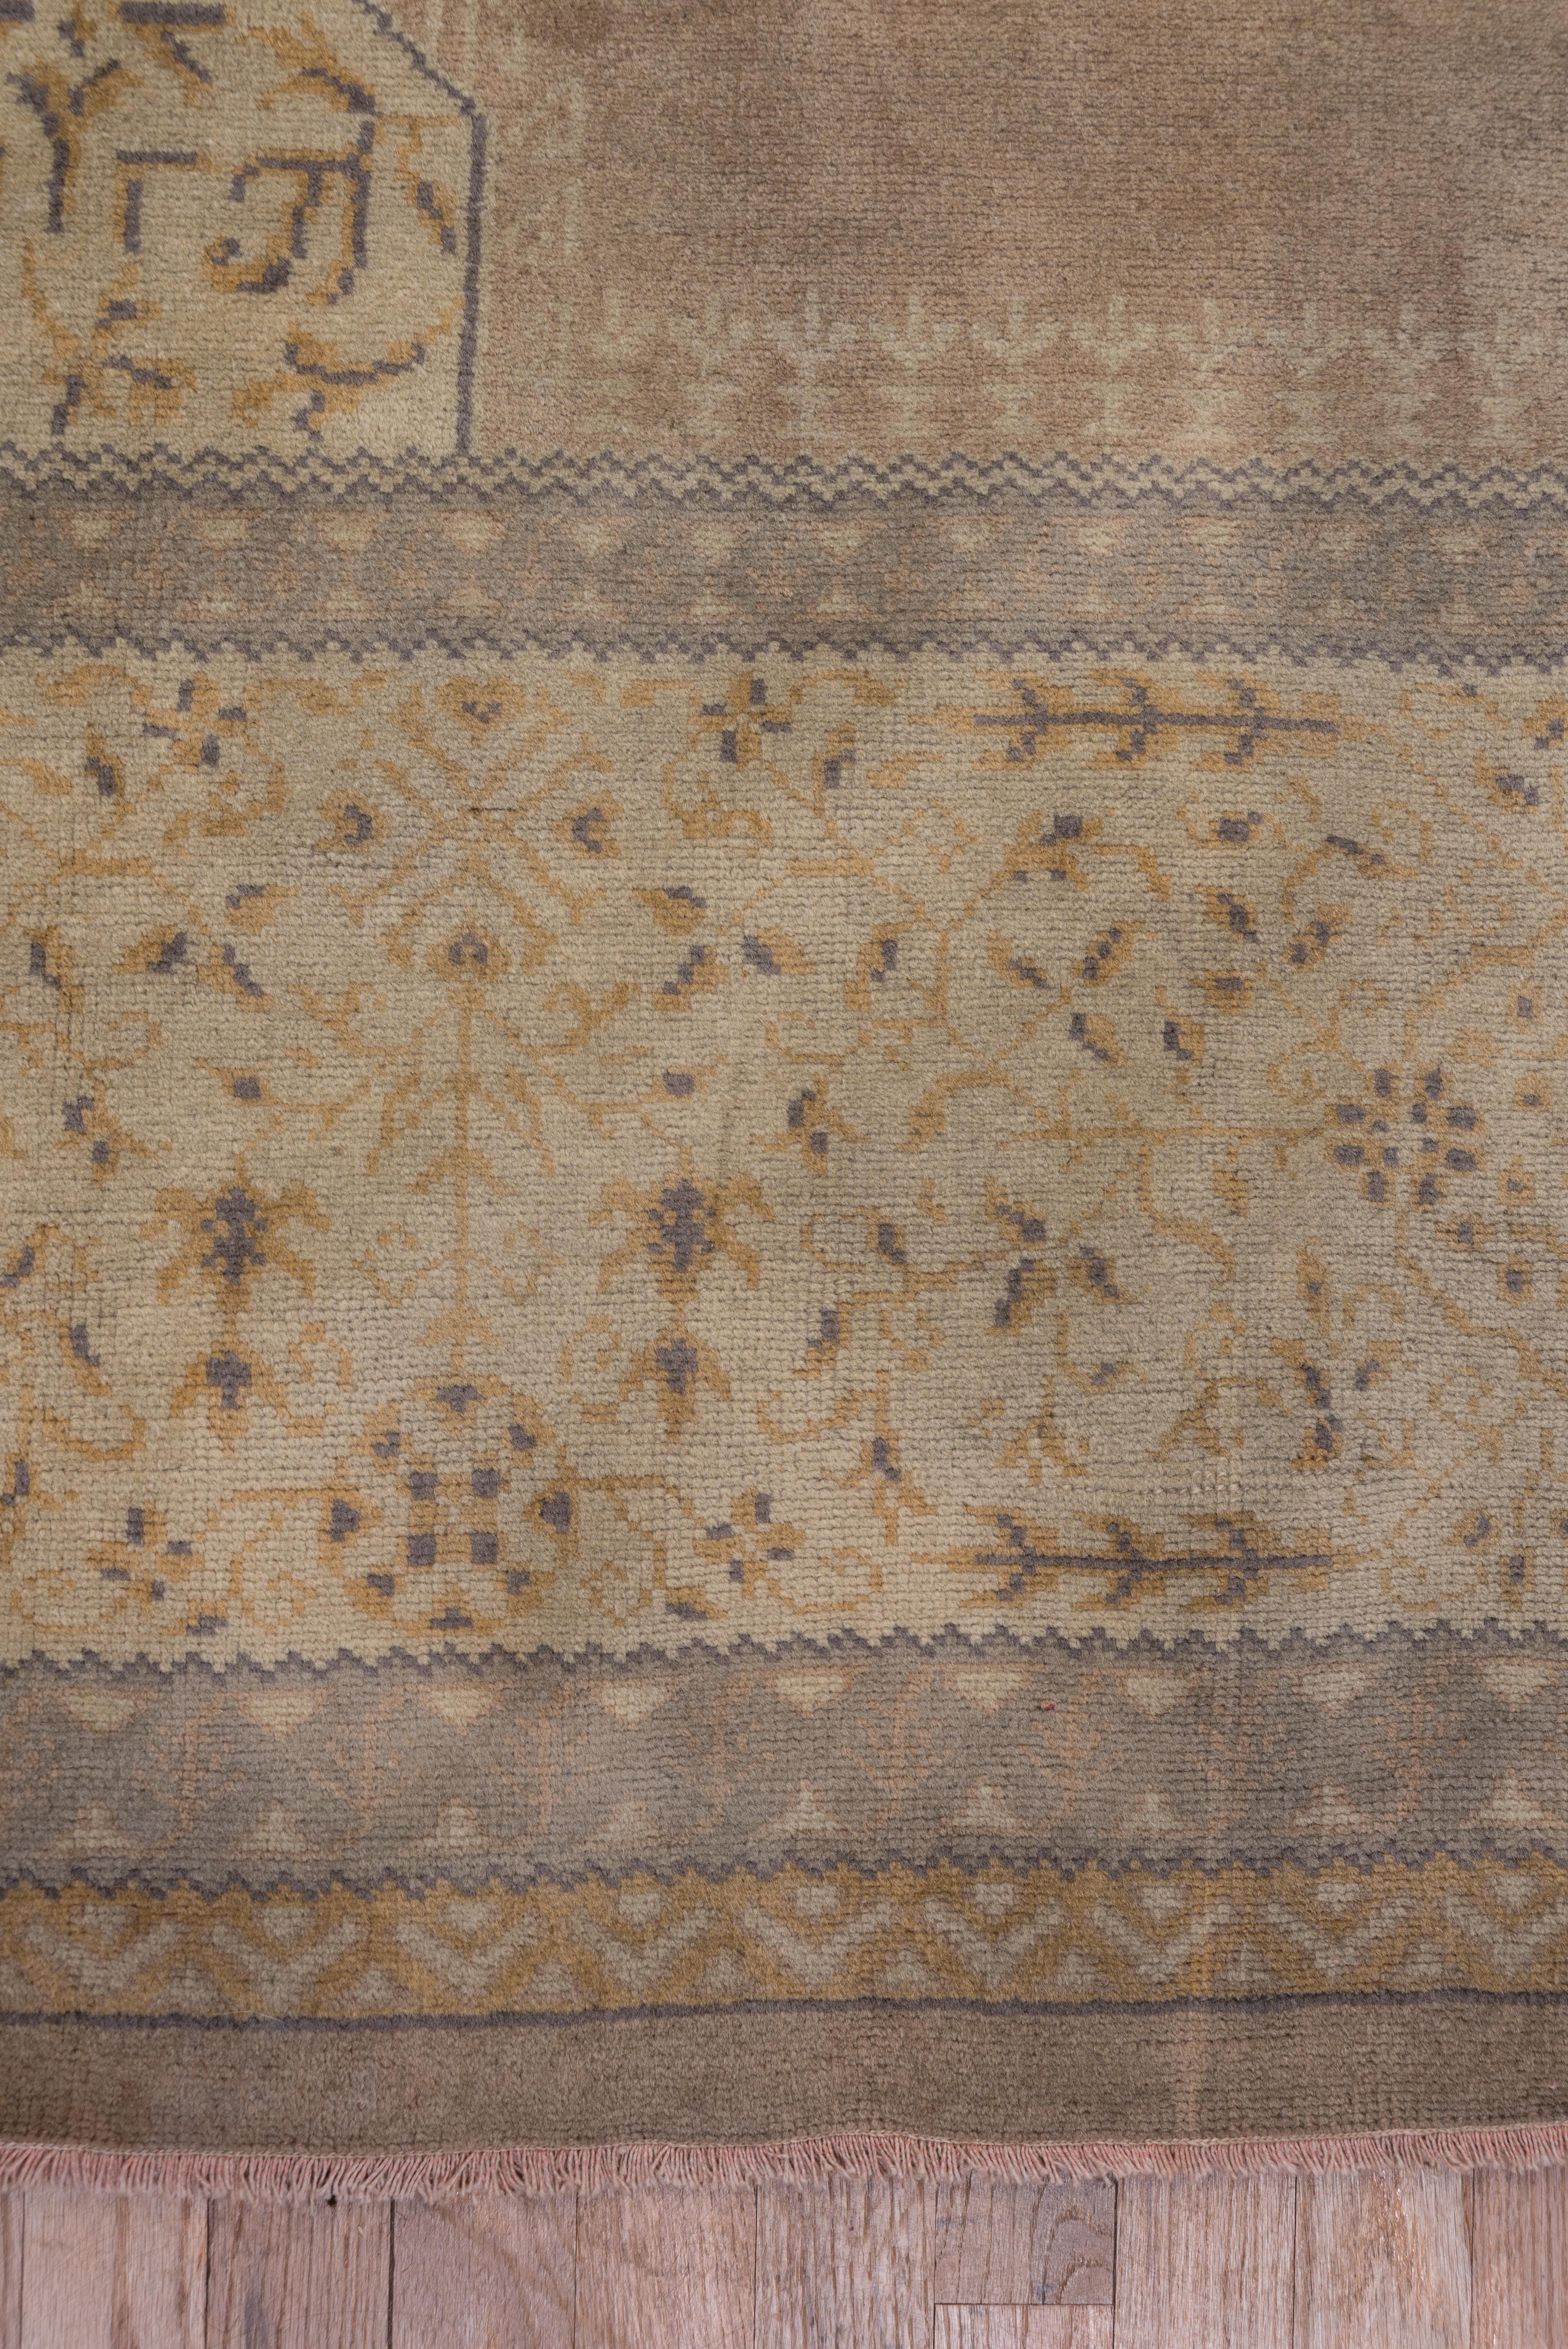 Antique Turkish Oushak Rug, Light Brown Open Field, circa 1920s For Sale 1